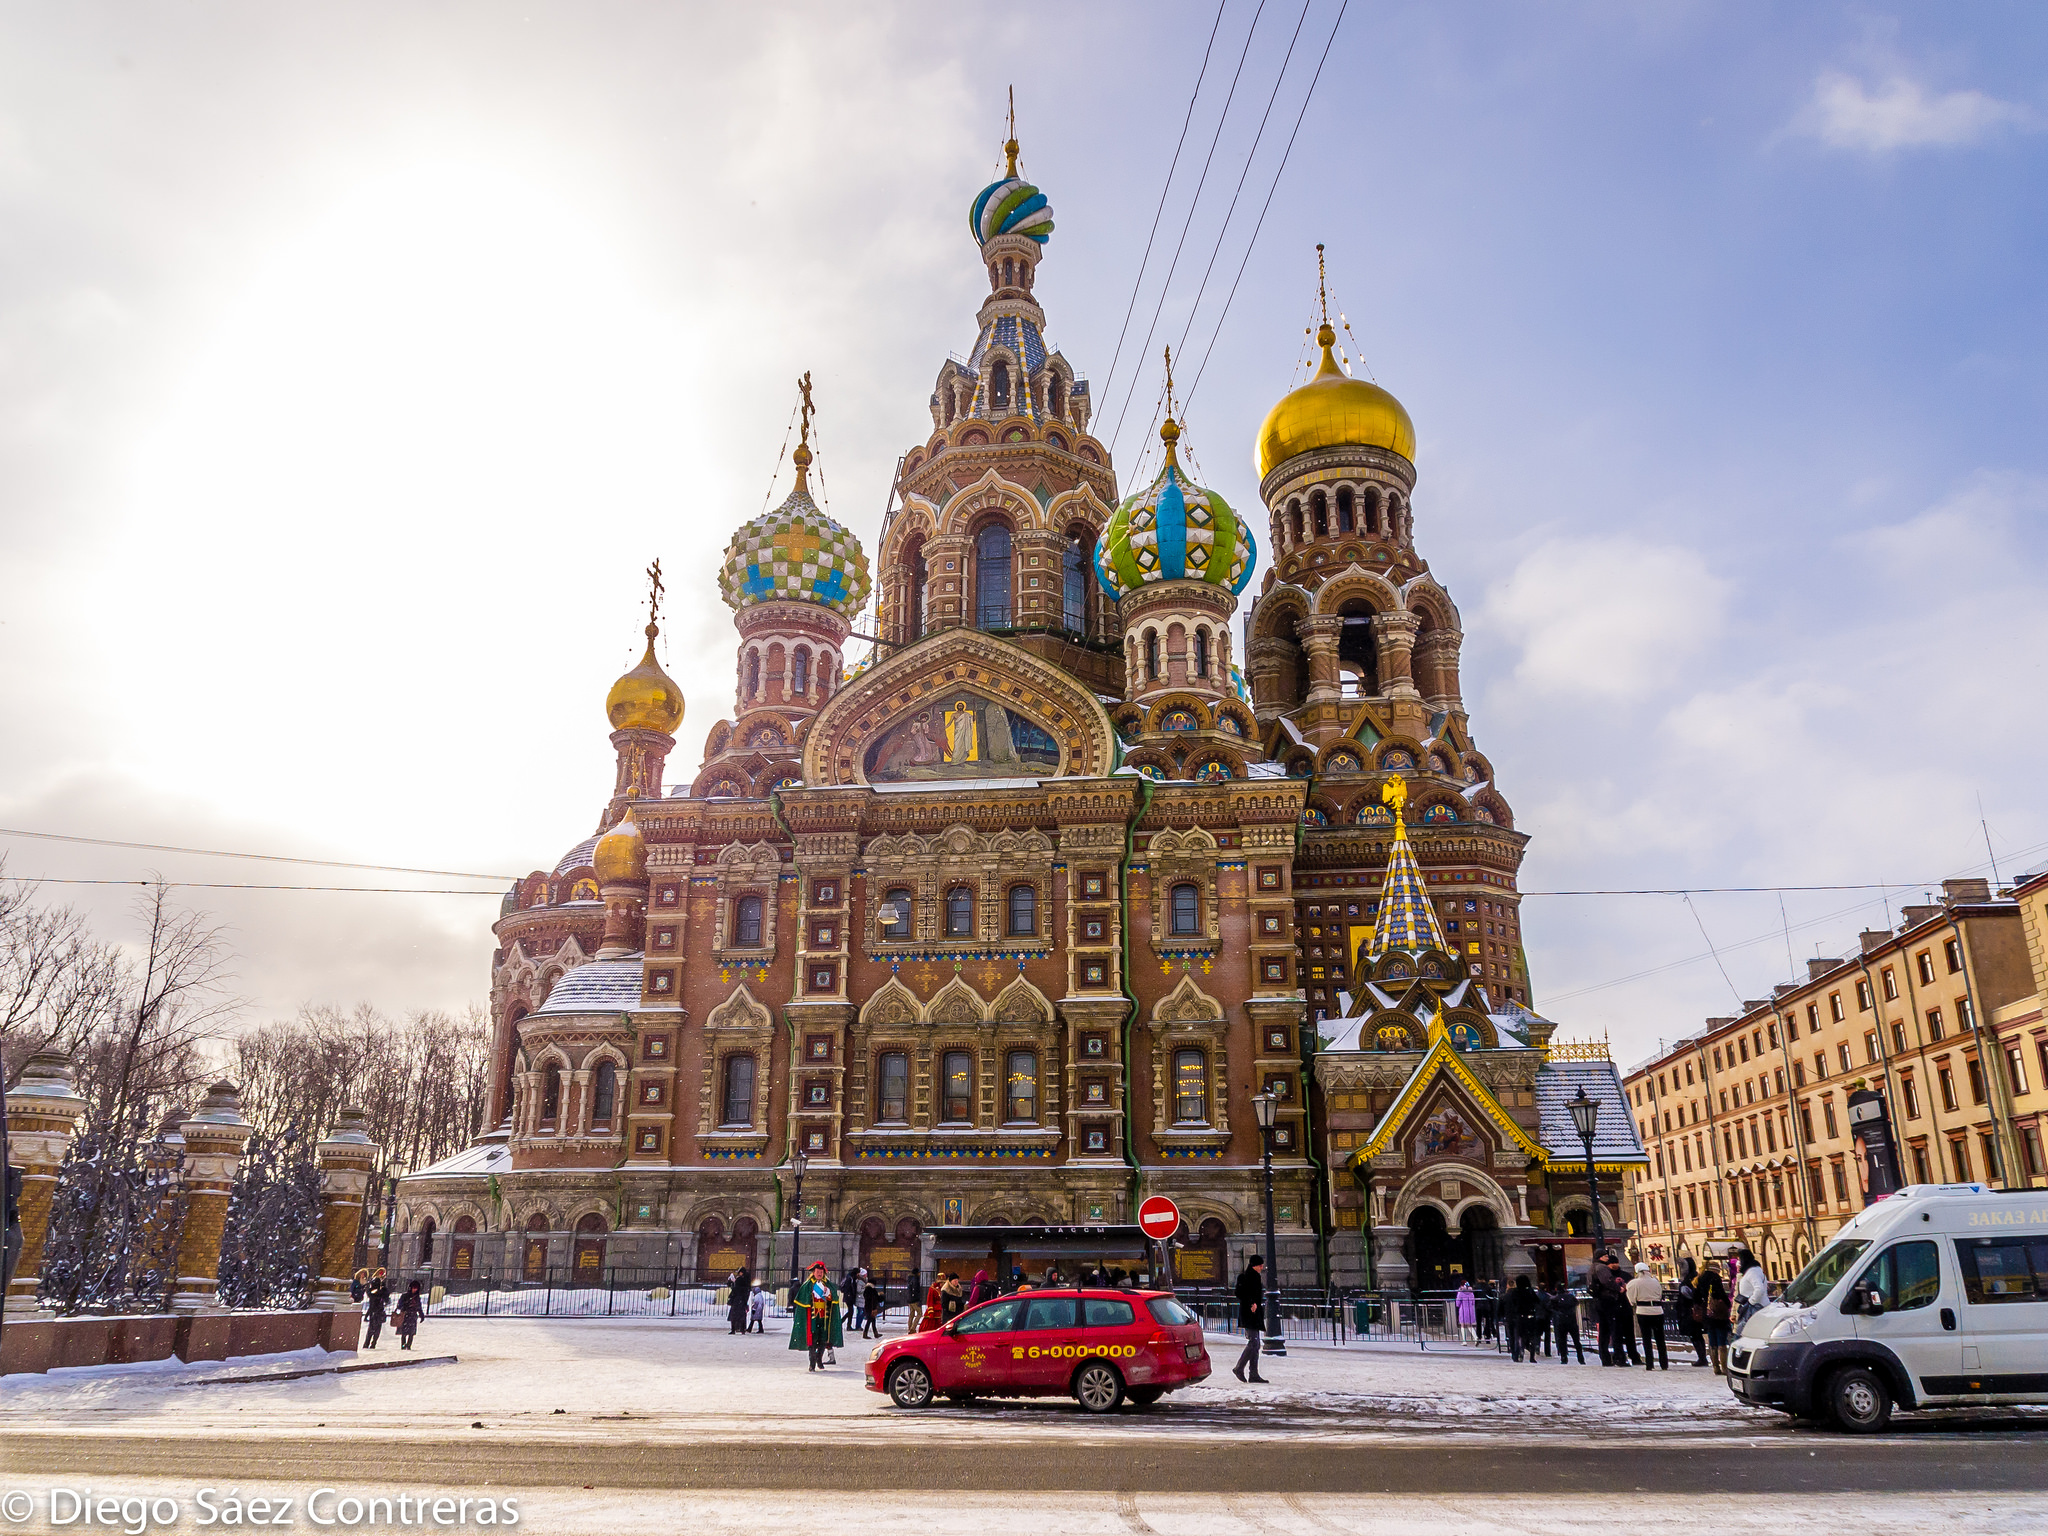 Nice Images Collection: Church Of The Savior On Blood Desktop Wallpapers